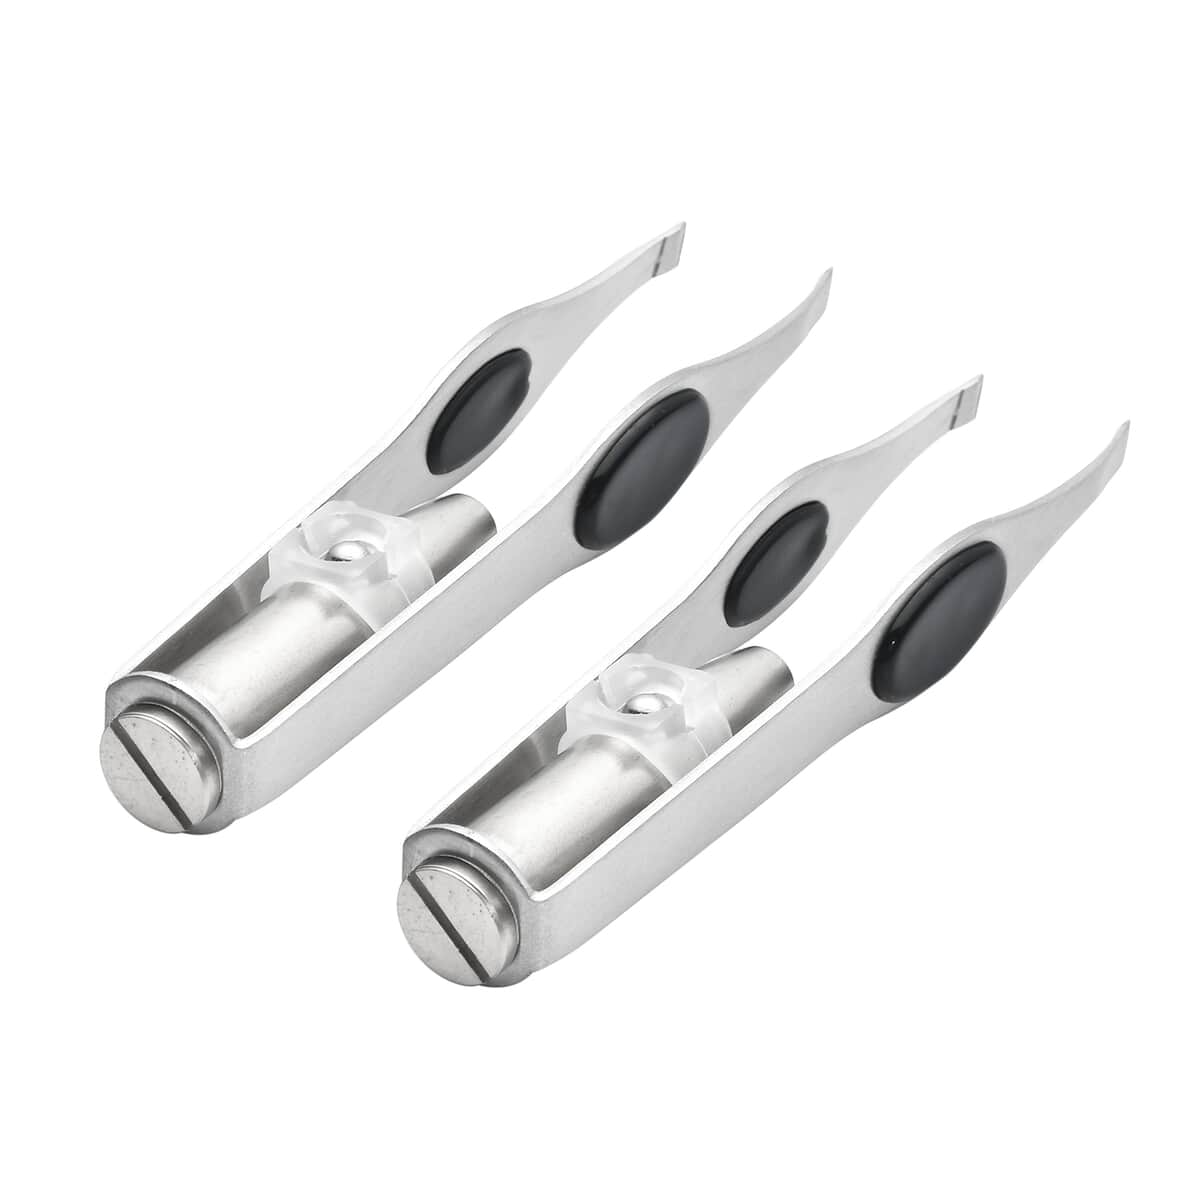 Set of 2pcs Stainless Steel Tweezers with Light (3xLR1 Included) image number 3